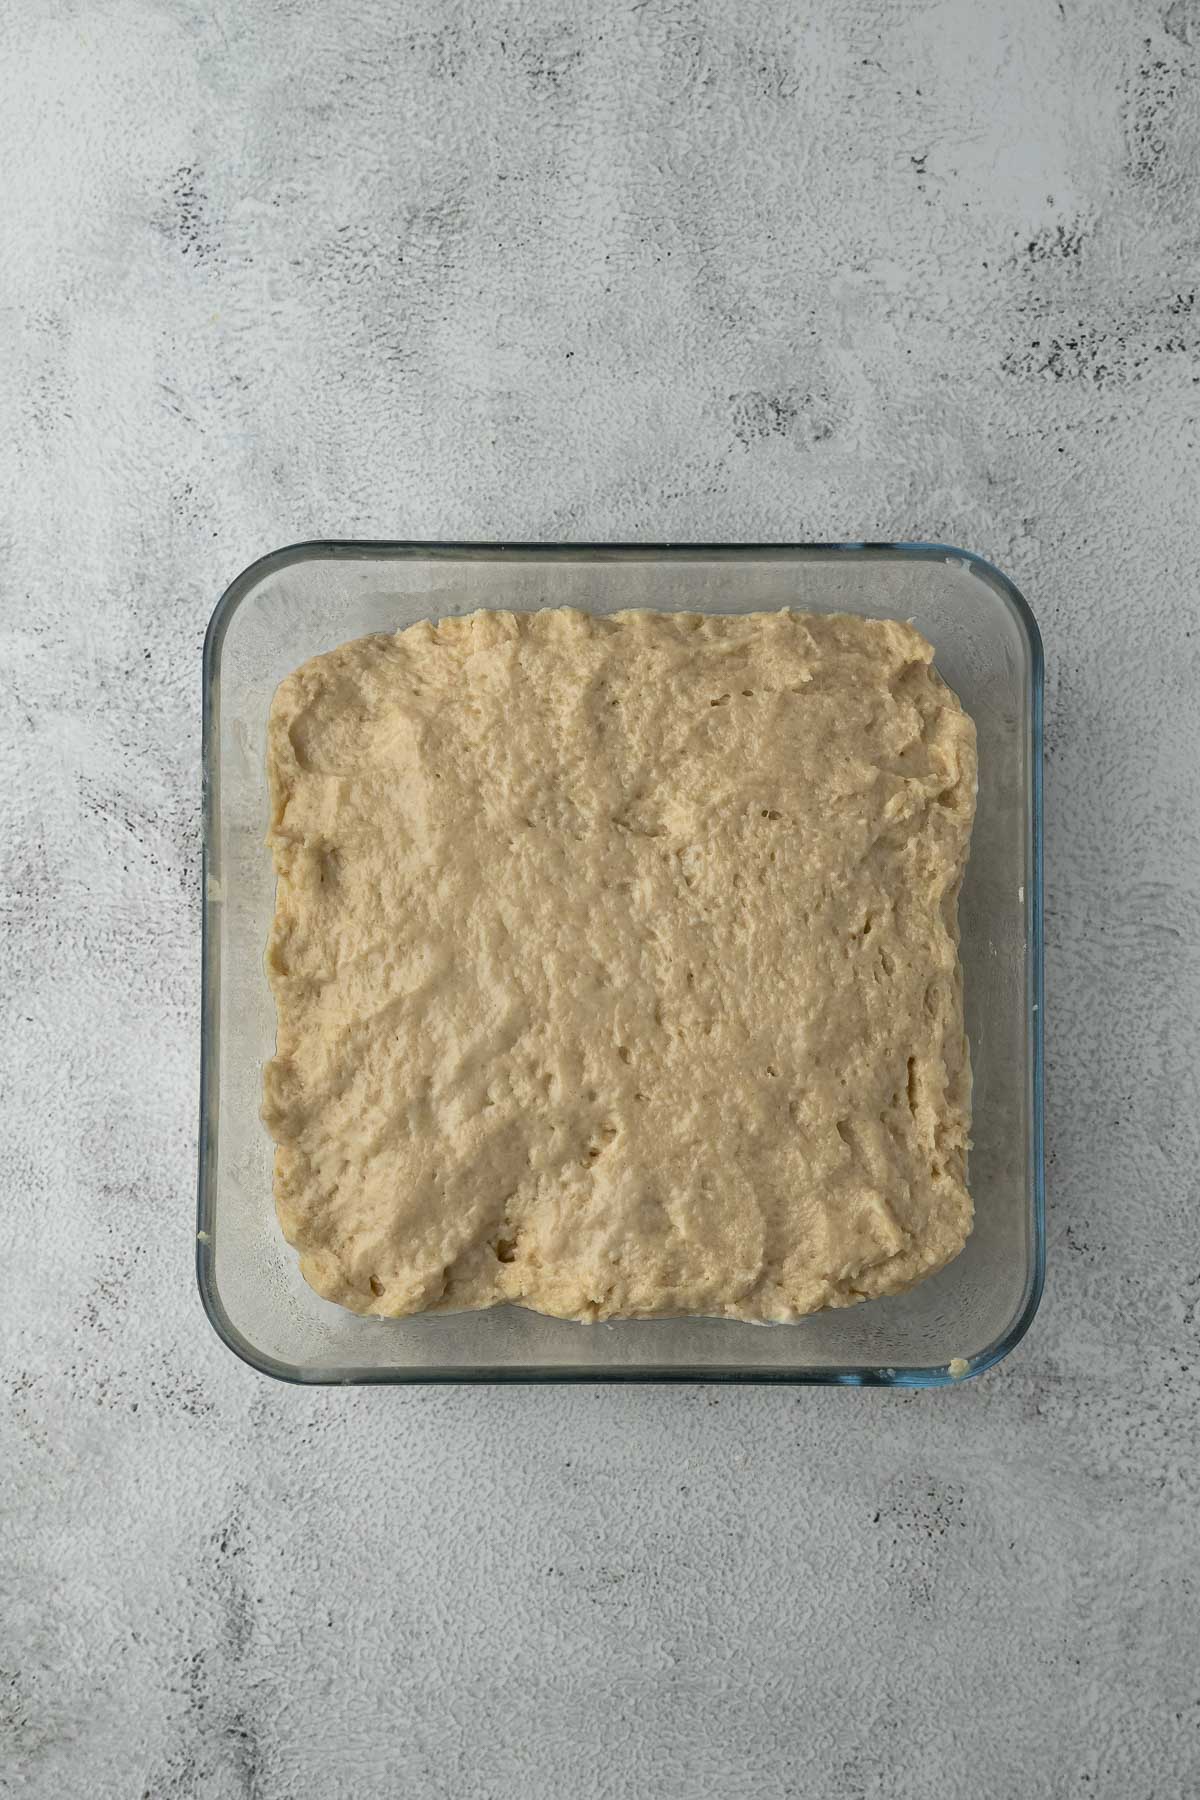 Rusk dough in a baking dish to make sliced rusks